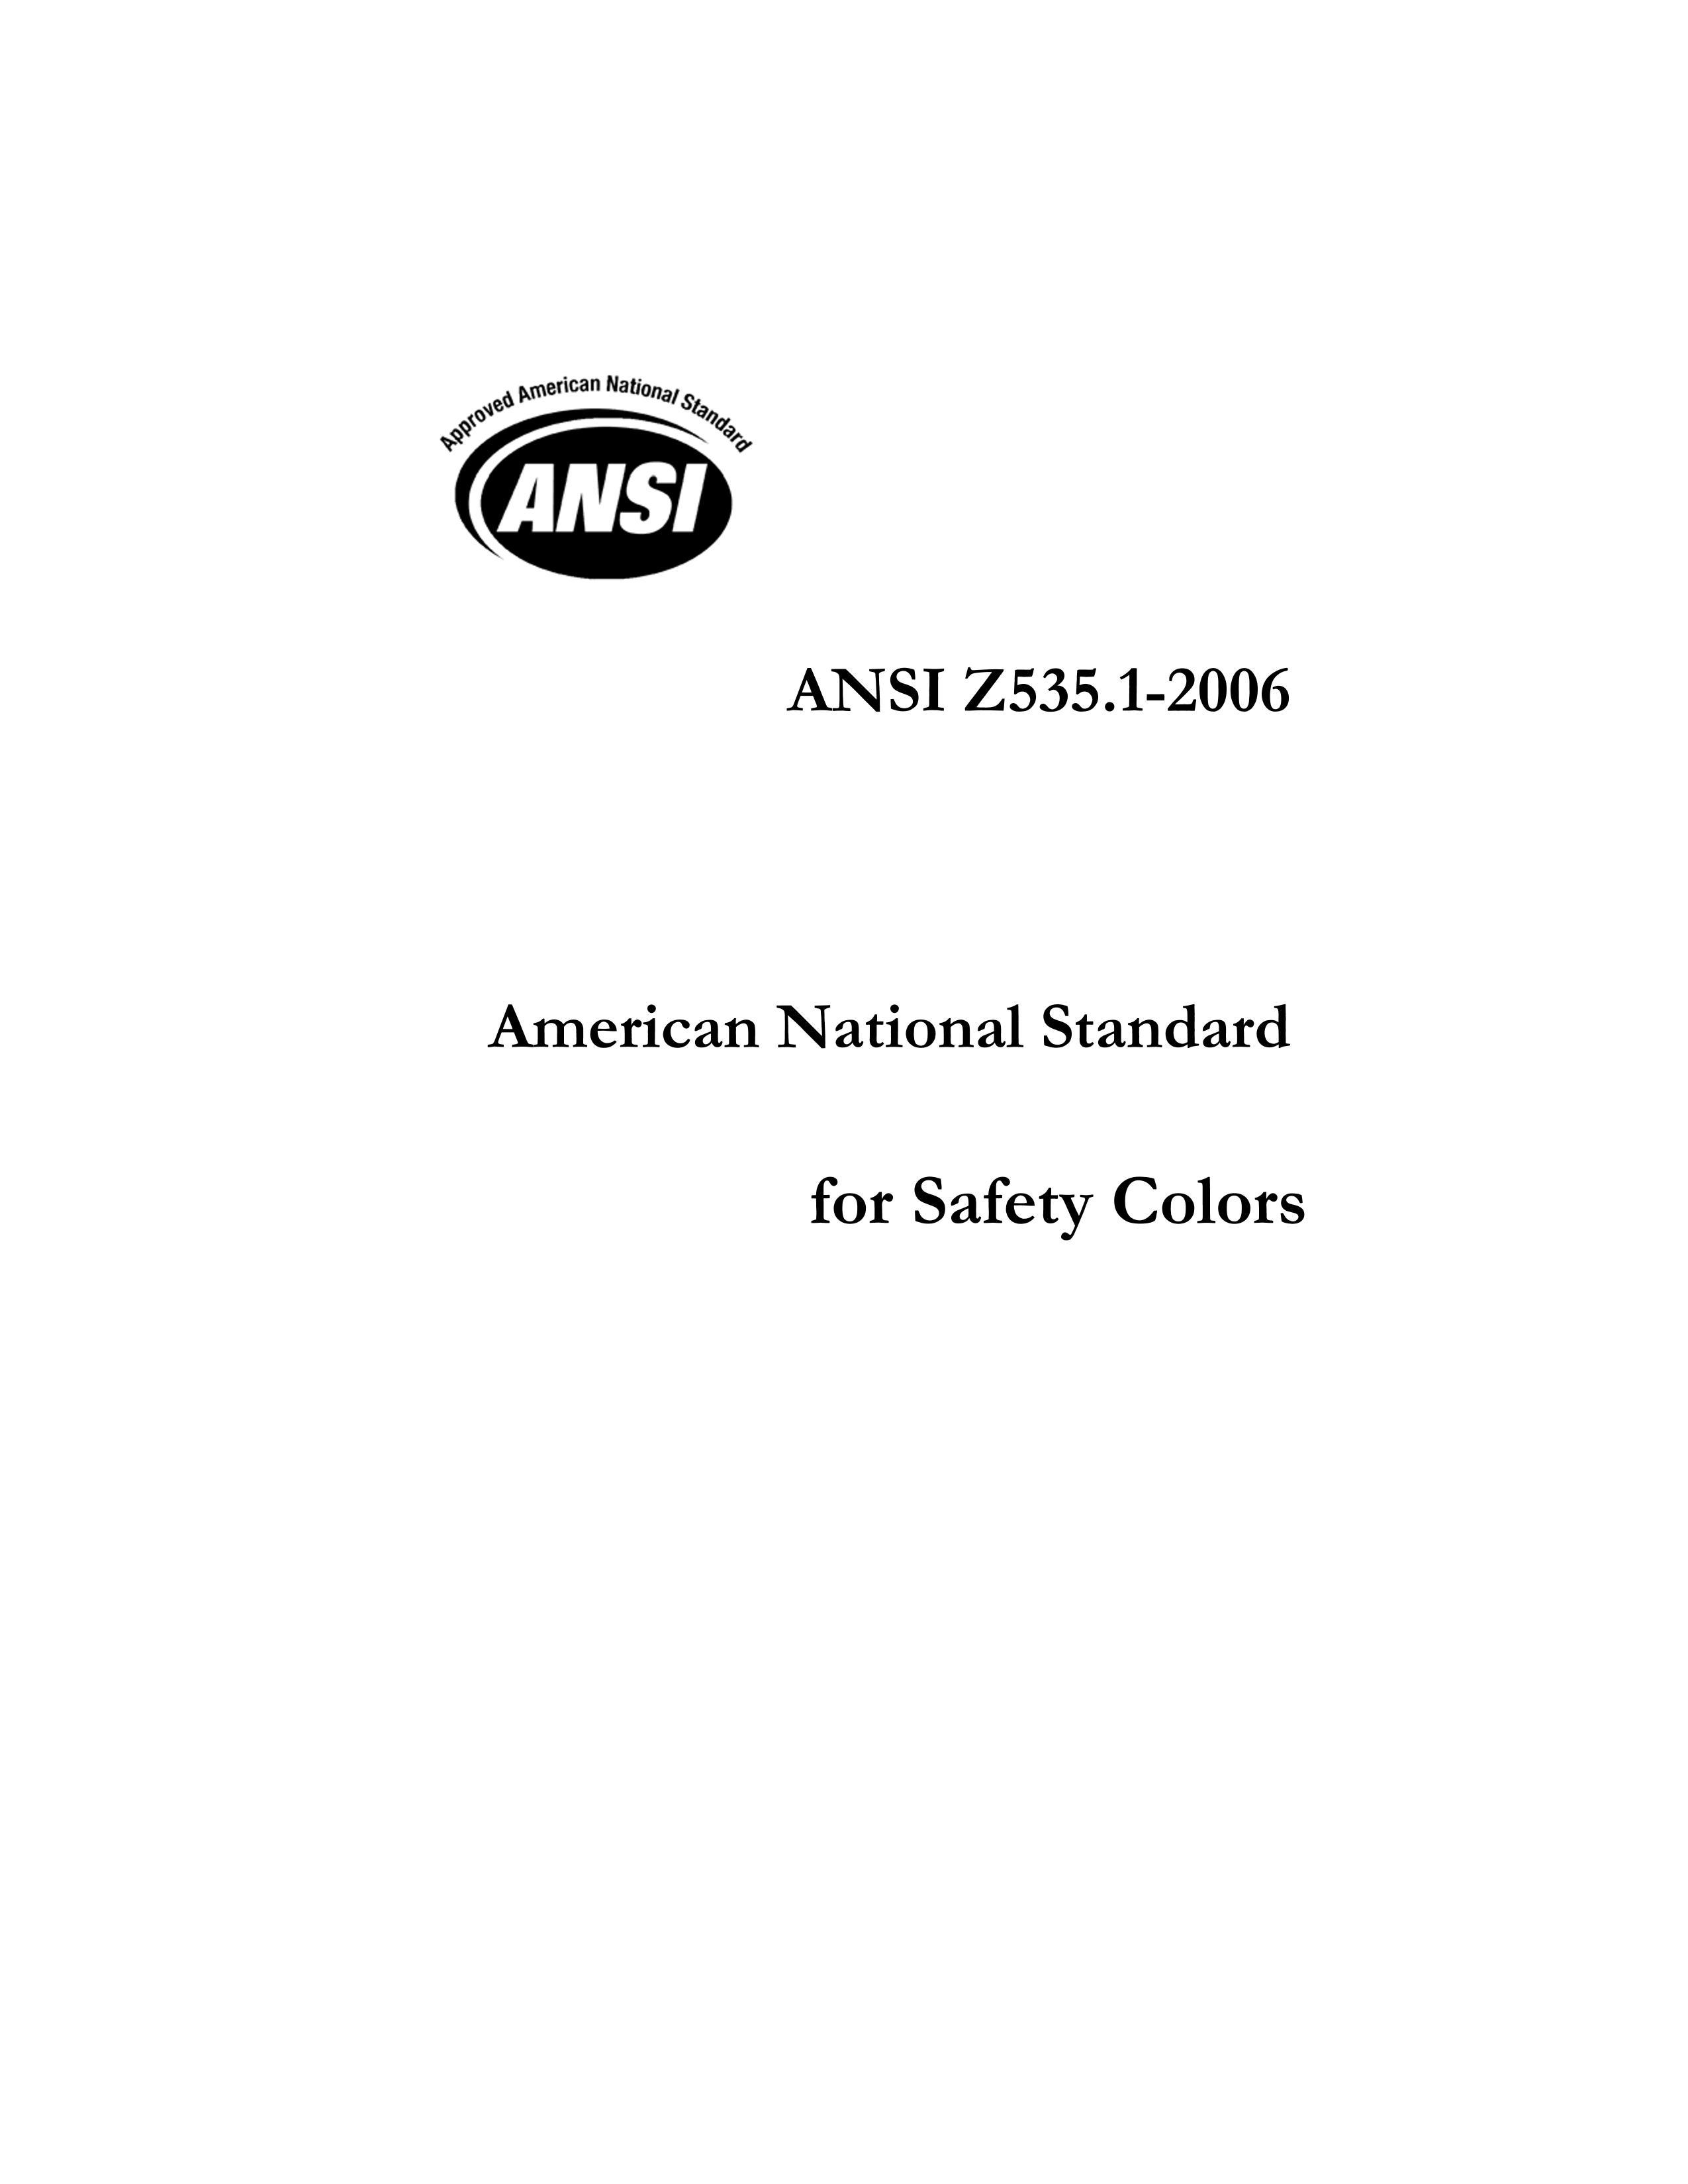 ANSI Z535.1-2006 American National Standard for Safety Colors.pdf1ҳ